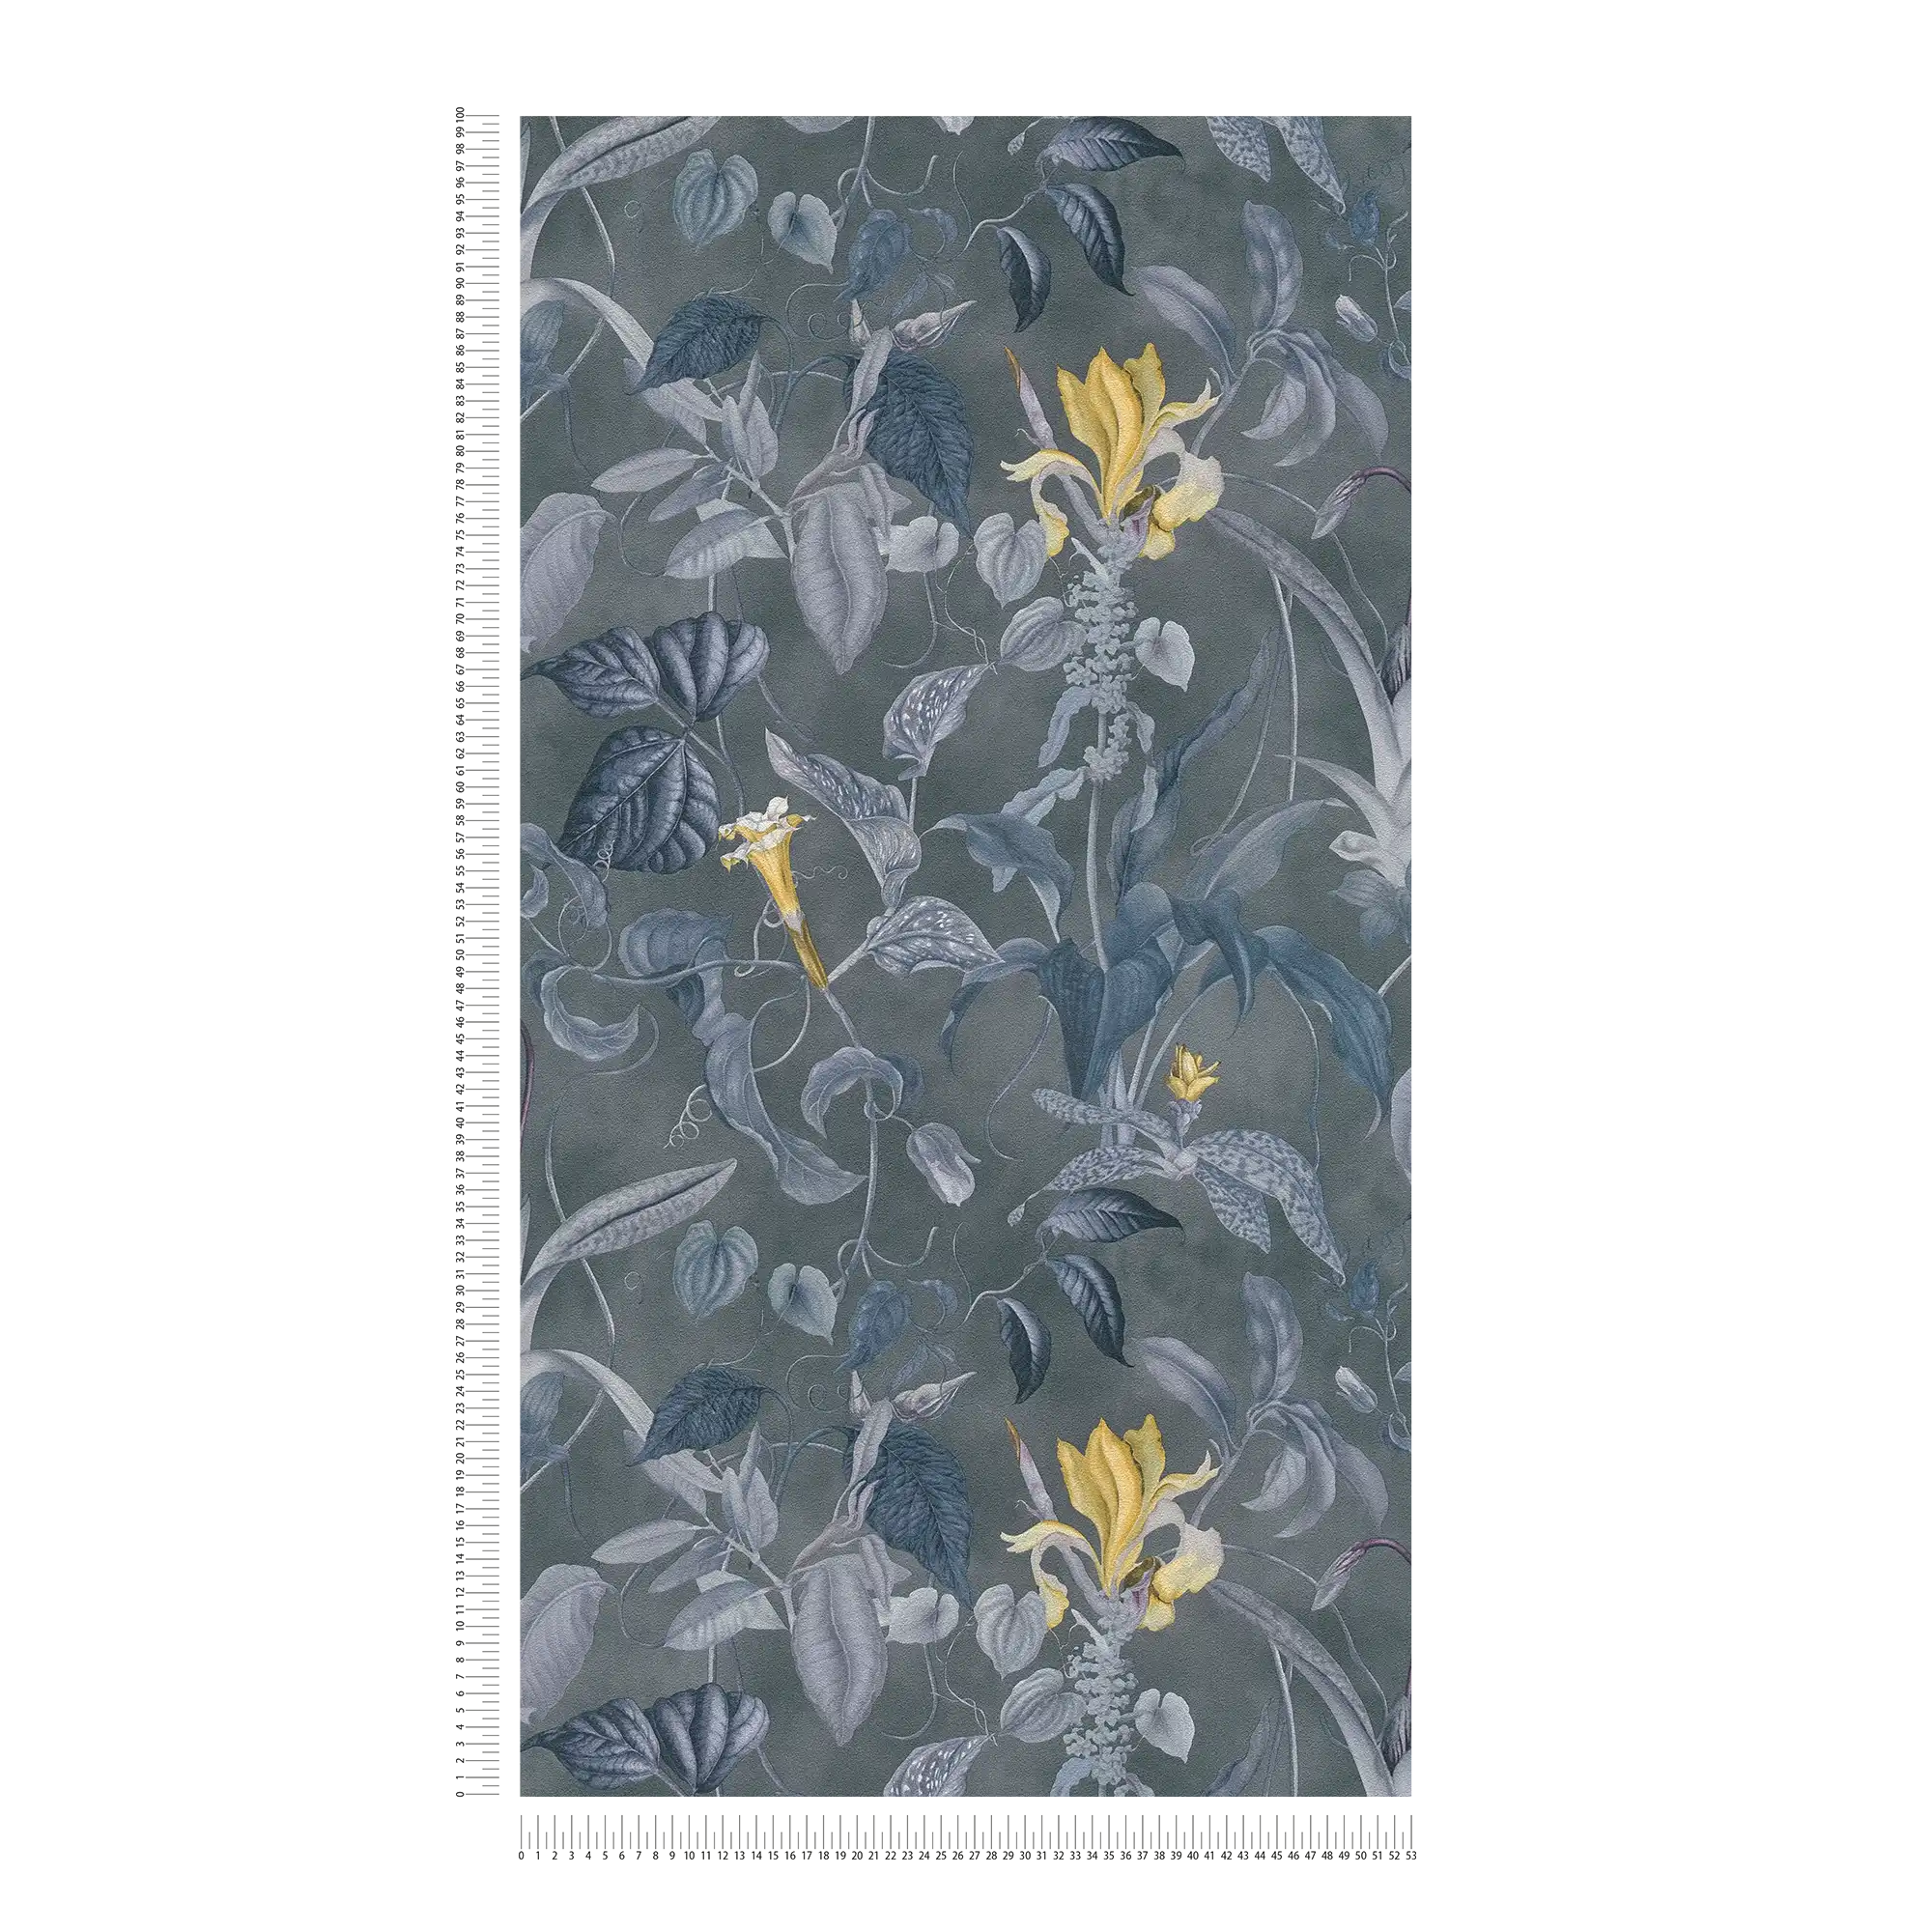             Tropical floral wallpaper grey-blue, Design by MICHALSKY
        